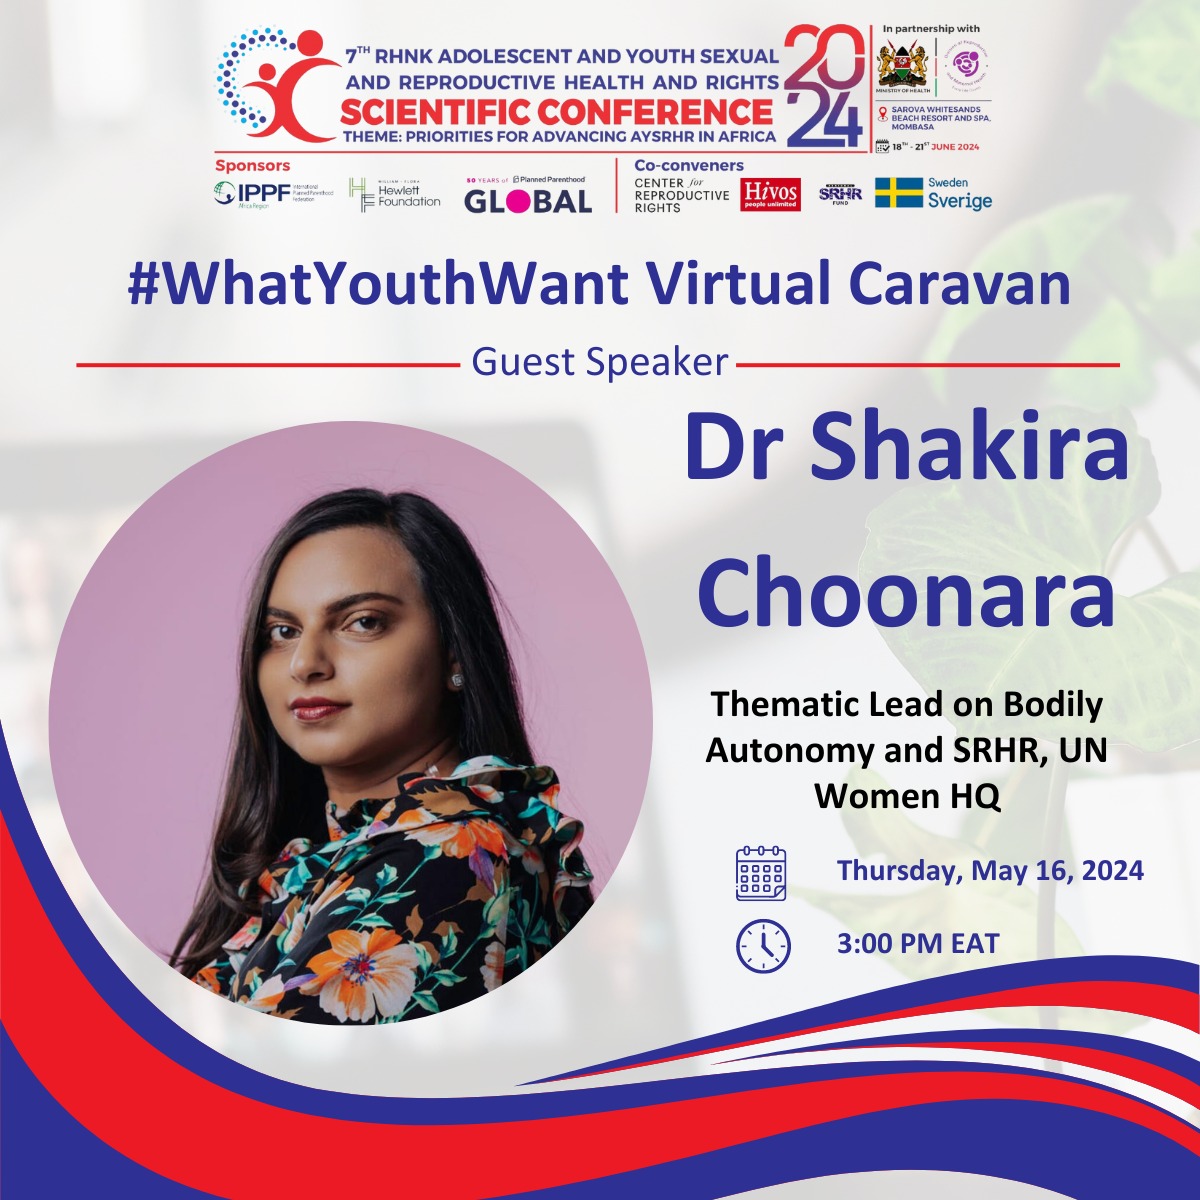 @ChoonaraShakira from @UN_Women will speak be our guest speaker, sharing her expertise in #AYSRHR & Innovations .Join our virtual caravan to  have this wonderful experience.Register using this link. 
us02web.zoom.us/meeting/regist… #RHNKConference2024